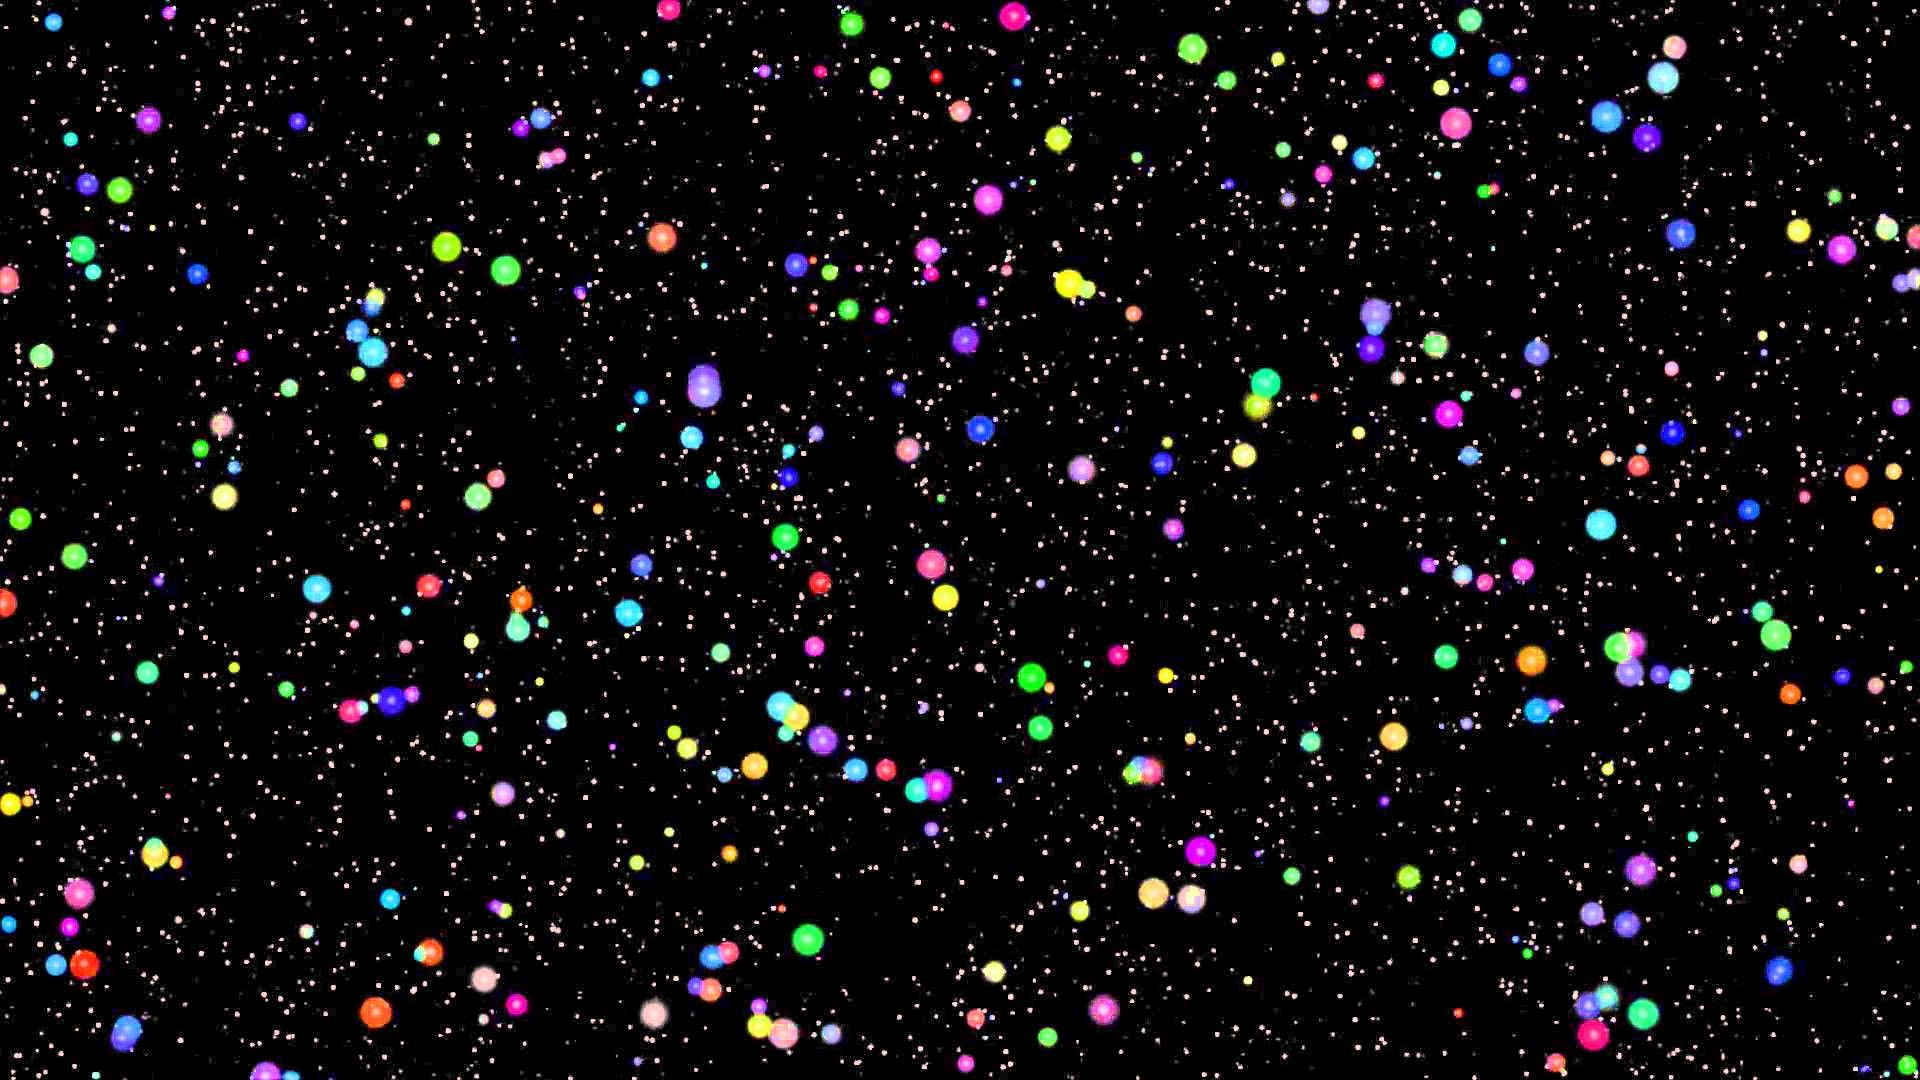 1920x1080 awesome space background hd animation video loop with music and free reuse  license